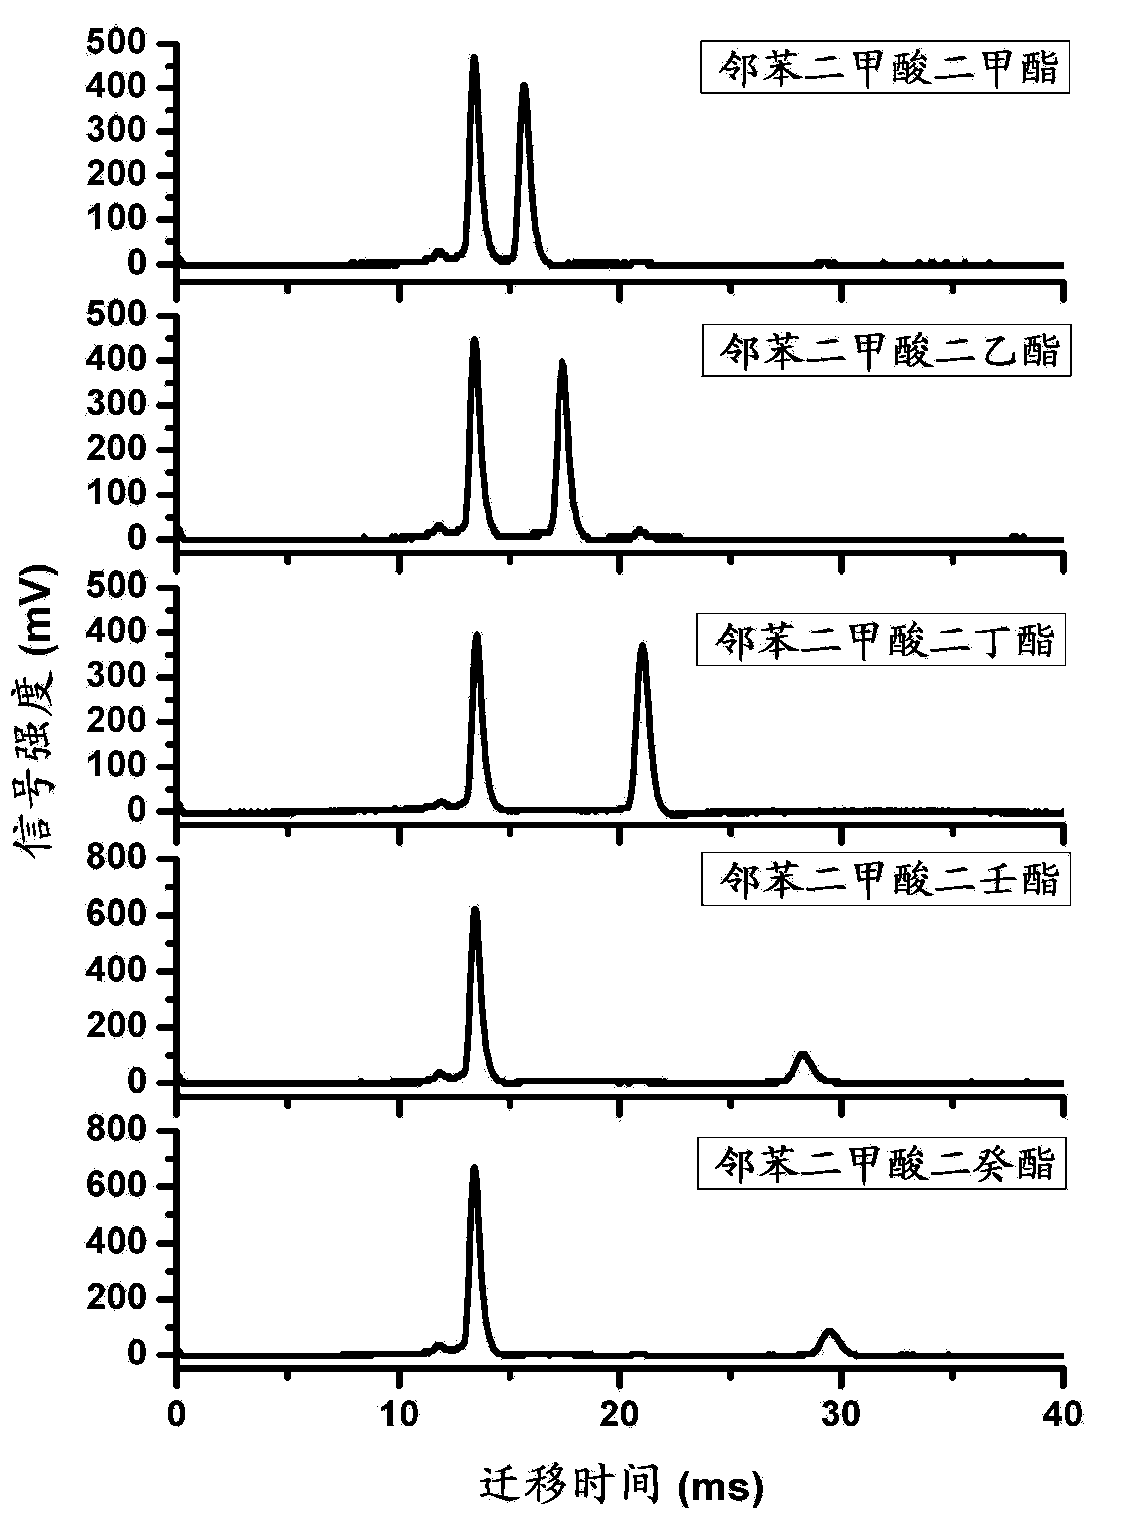 Application of doping agent in test of phthalic acid ester compounds by use of ion mobility spectrometry